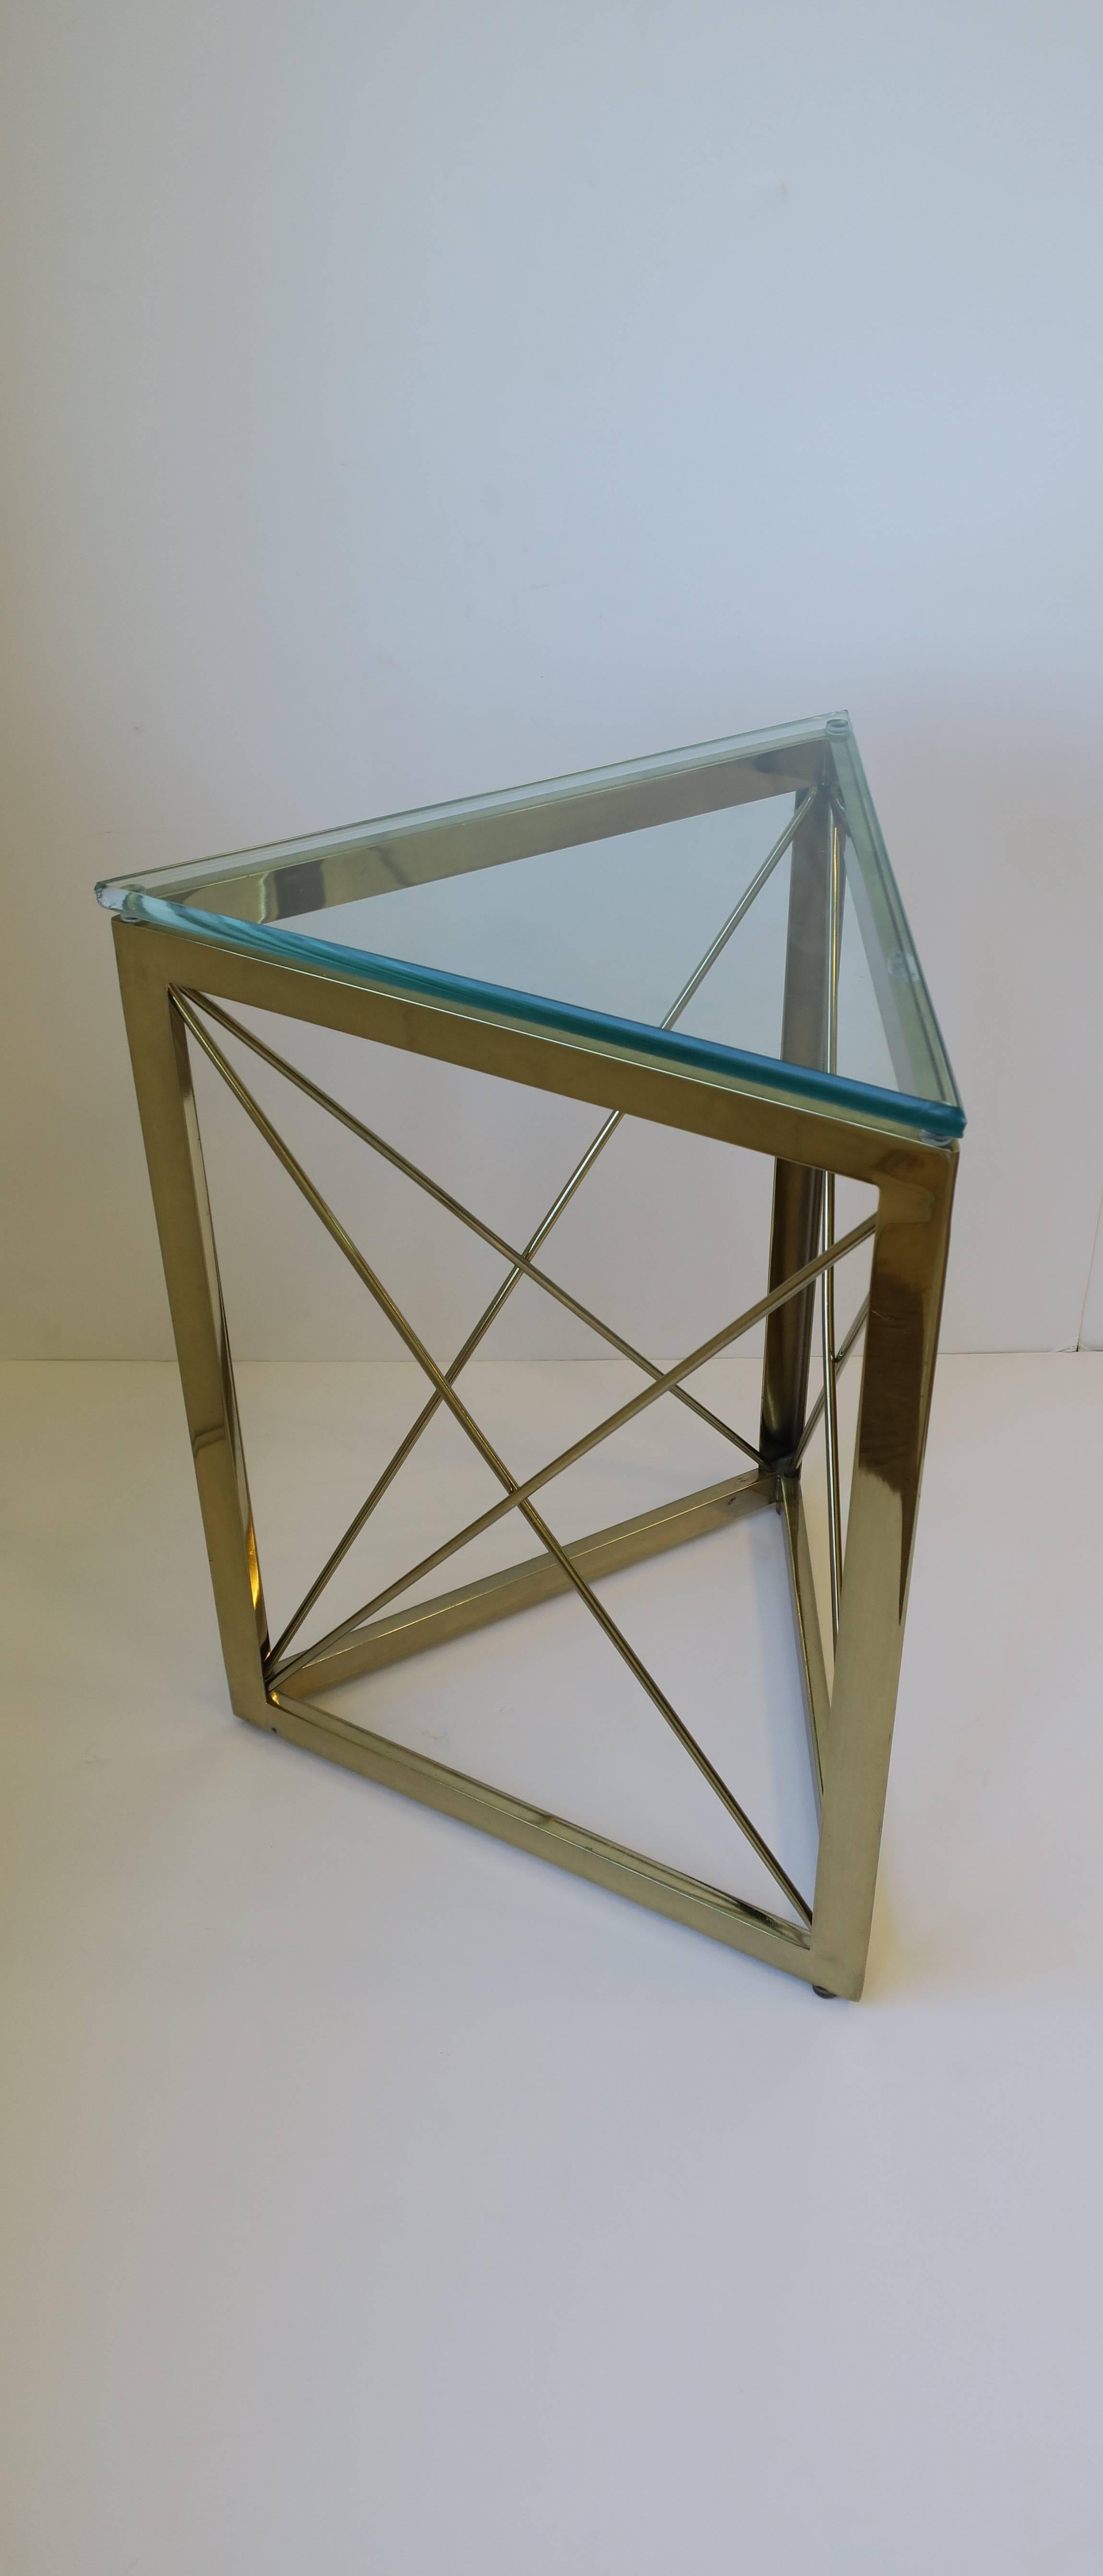 A beautiful and unique Modern style triangle shaped brass and glass side or drinks table with X-design base on all three sides. Glass top measures 1/2 in. thick; glass is tempered. 

Table measures: 16 in. x 16 in. x 16 in x 21.25 in. H. 

